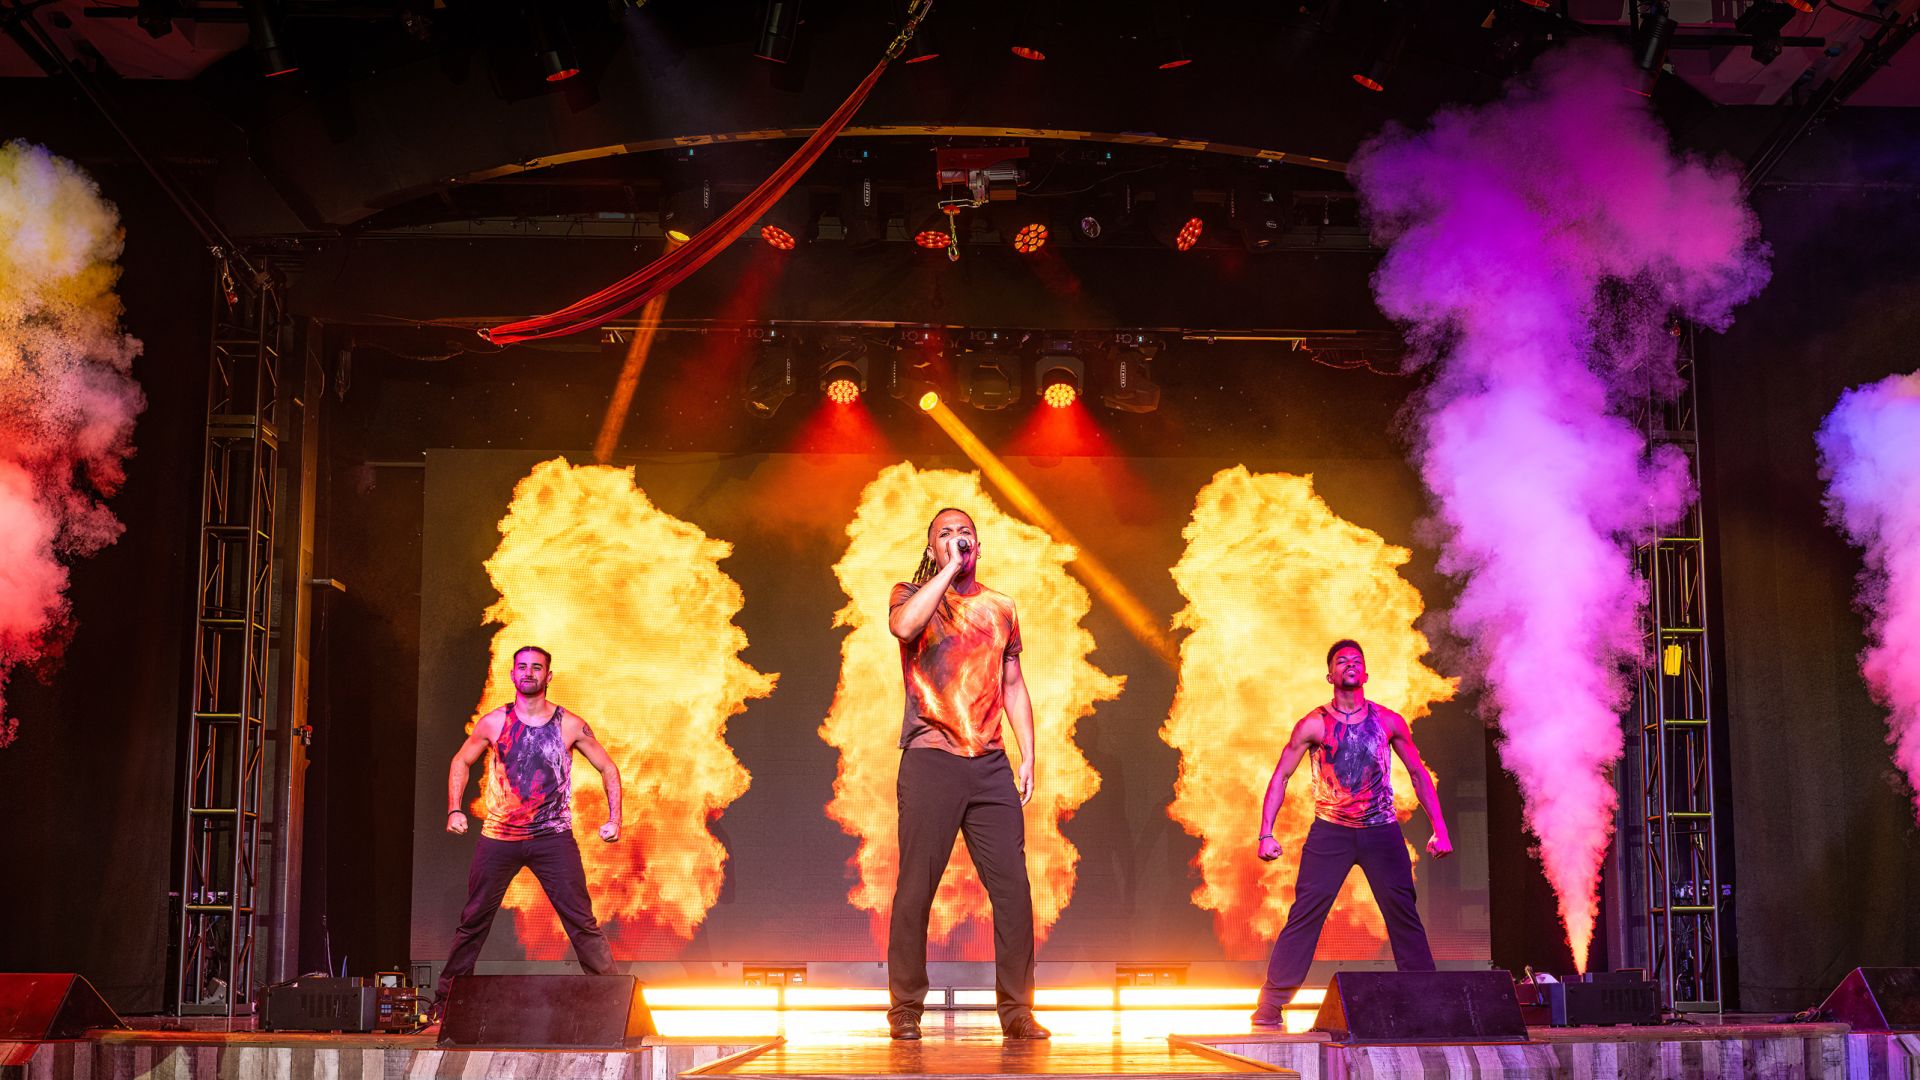 A Group Of People On A Stage With Fire And Smoke